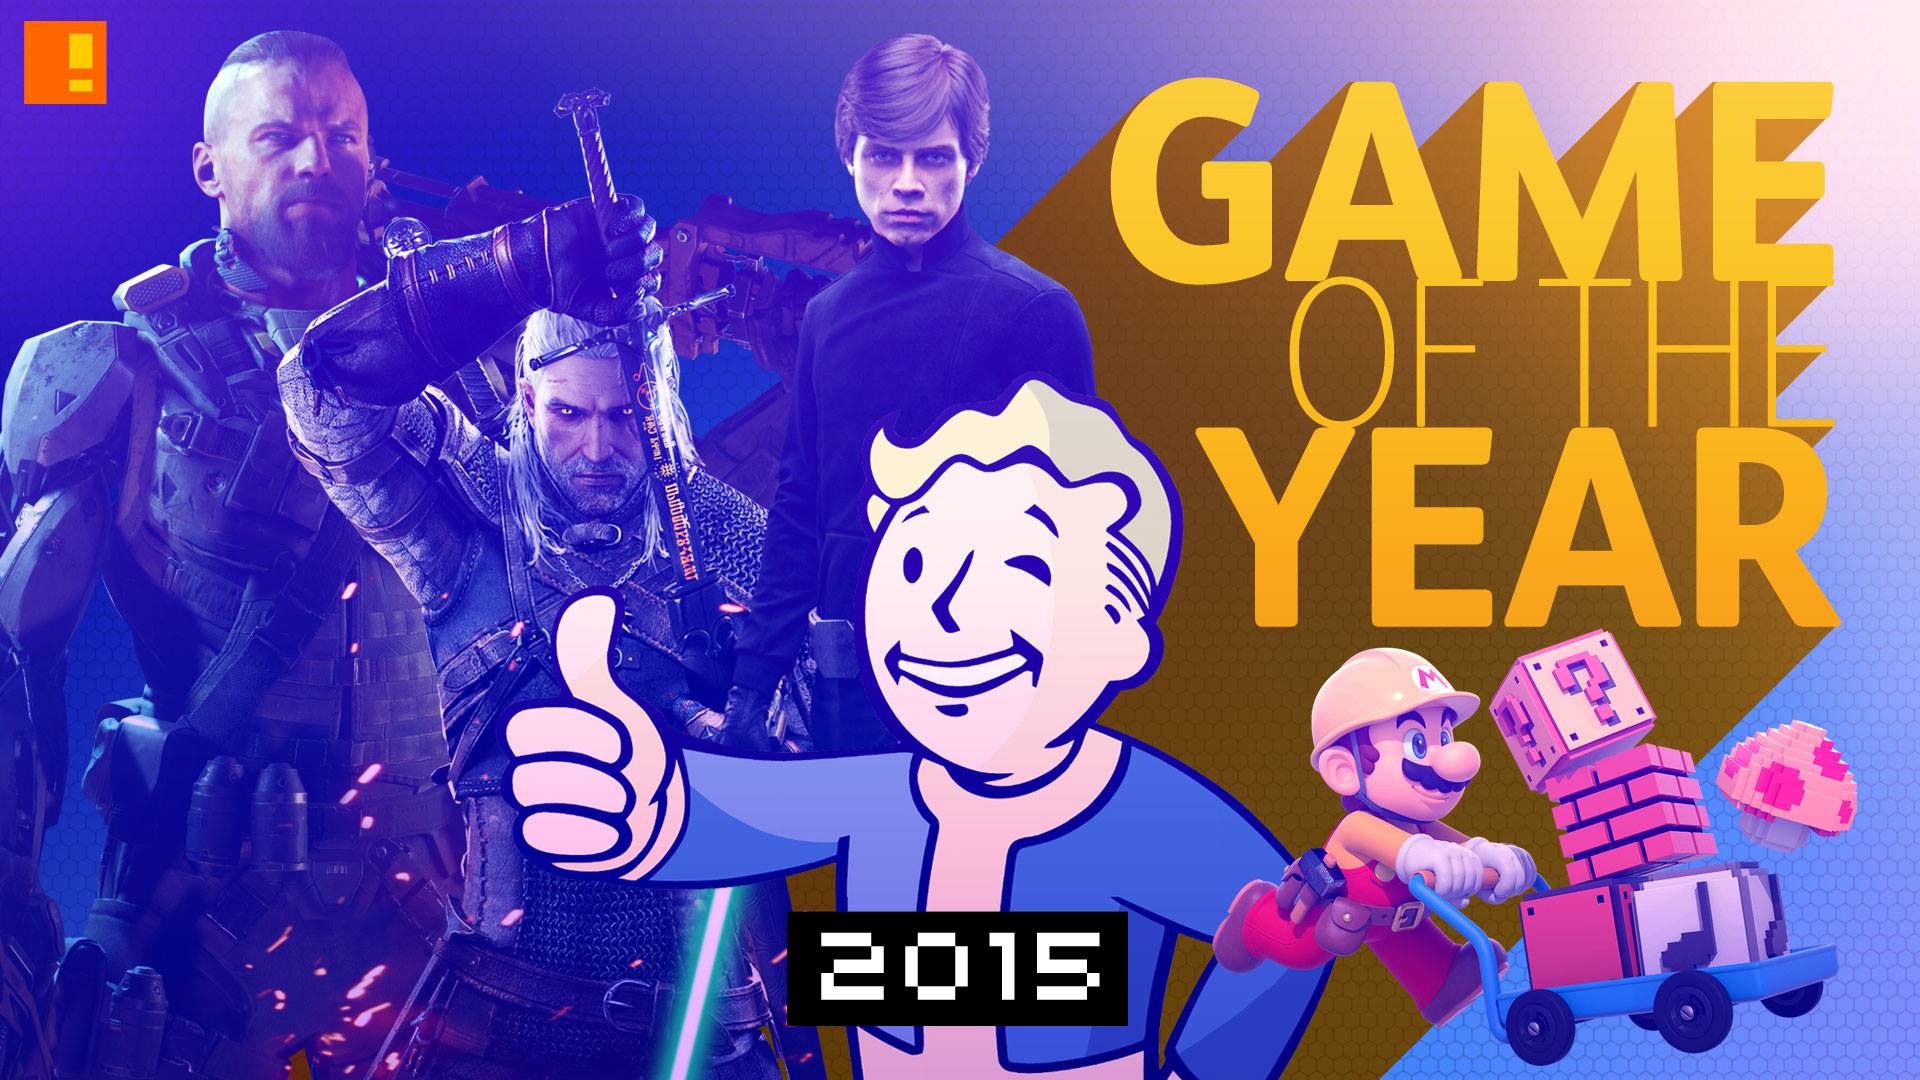 Game of the year. the action pixel. entertainment on tap. @theactionpixel